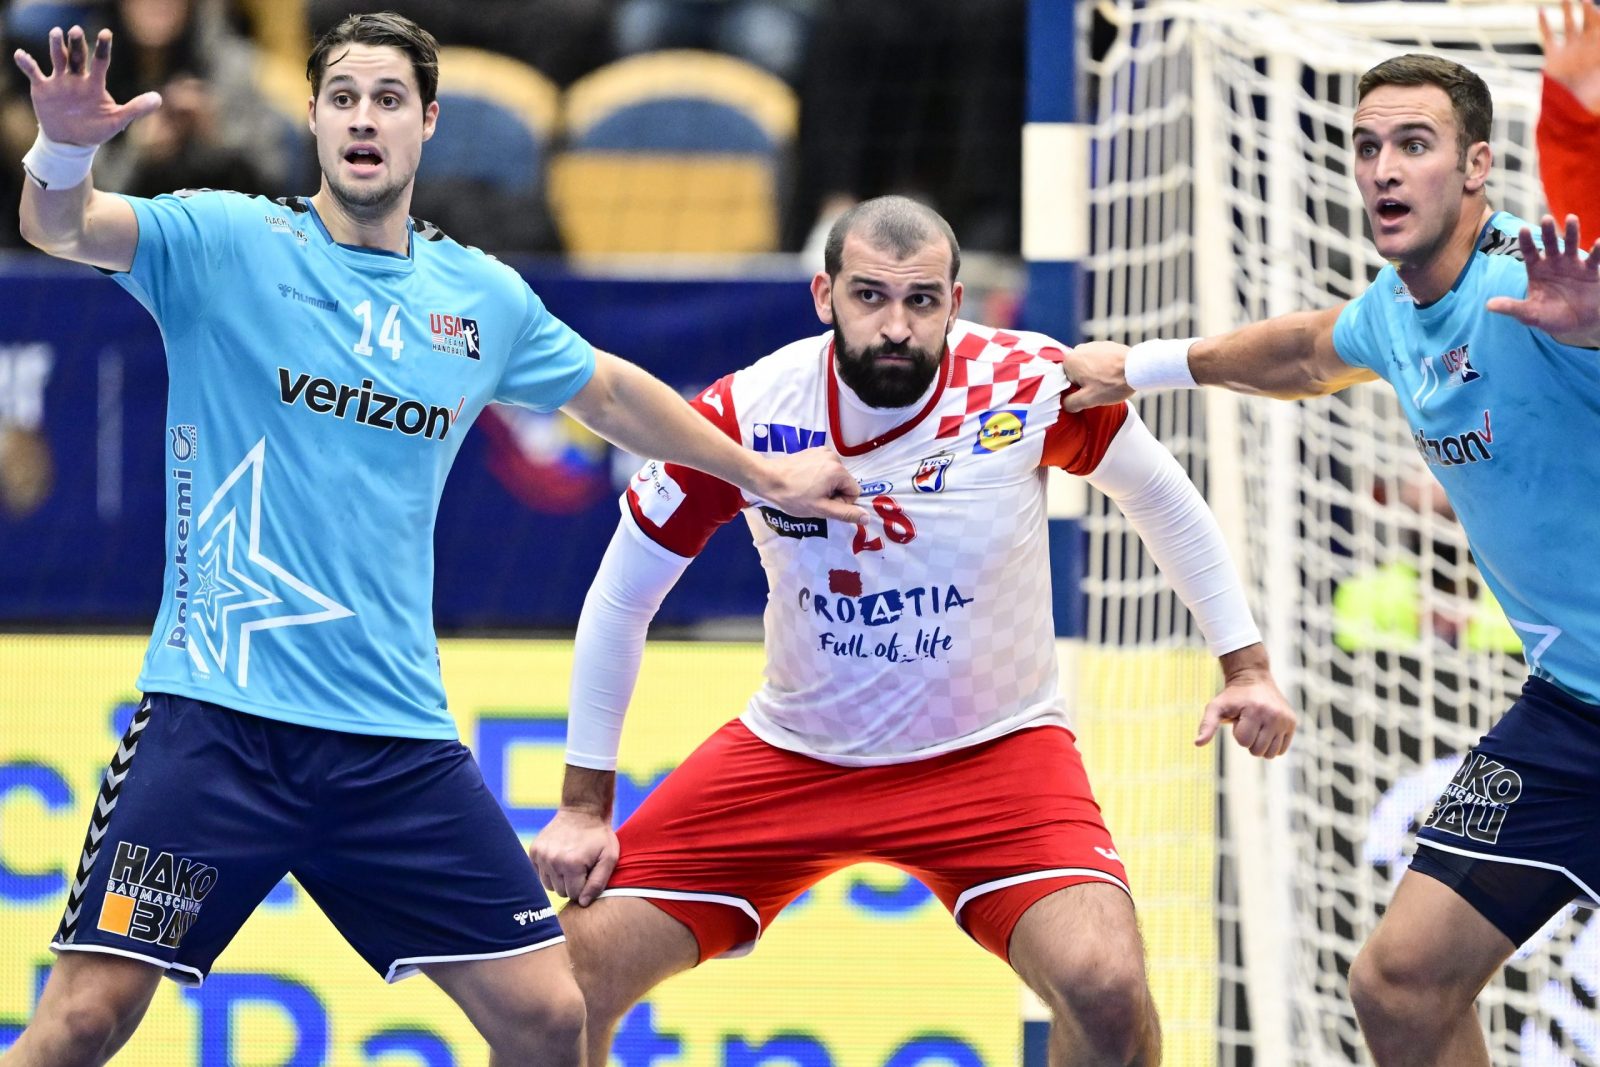 epa10407672 Croatia's Zeljko Musa (C) is stopped by USA's Ian Hueter (L) and Andrew Donlin during the IHF Men's World Championship group G handball match between Croatia and USA, in Jonkoping, Sweden, 15 January 2023.  EPA/Mikael Fritzon SWEDEN OUT SWEDEN OUT